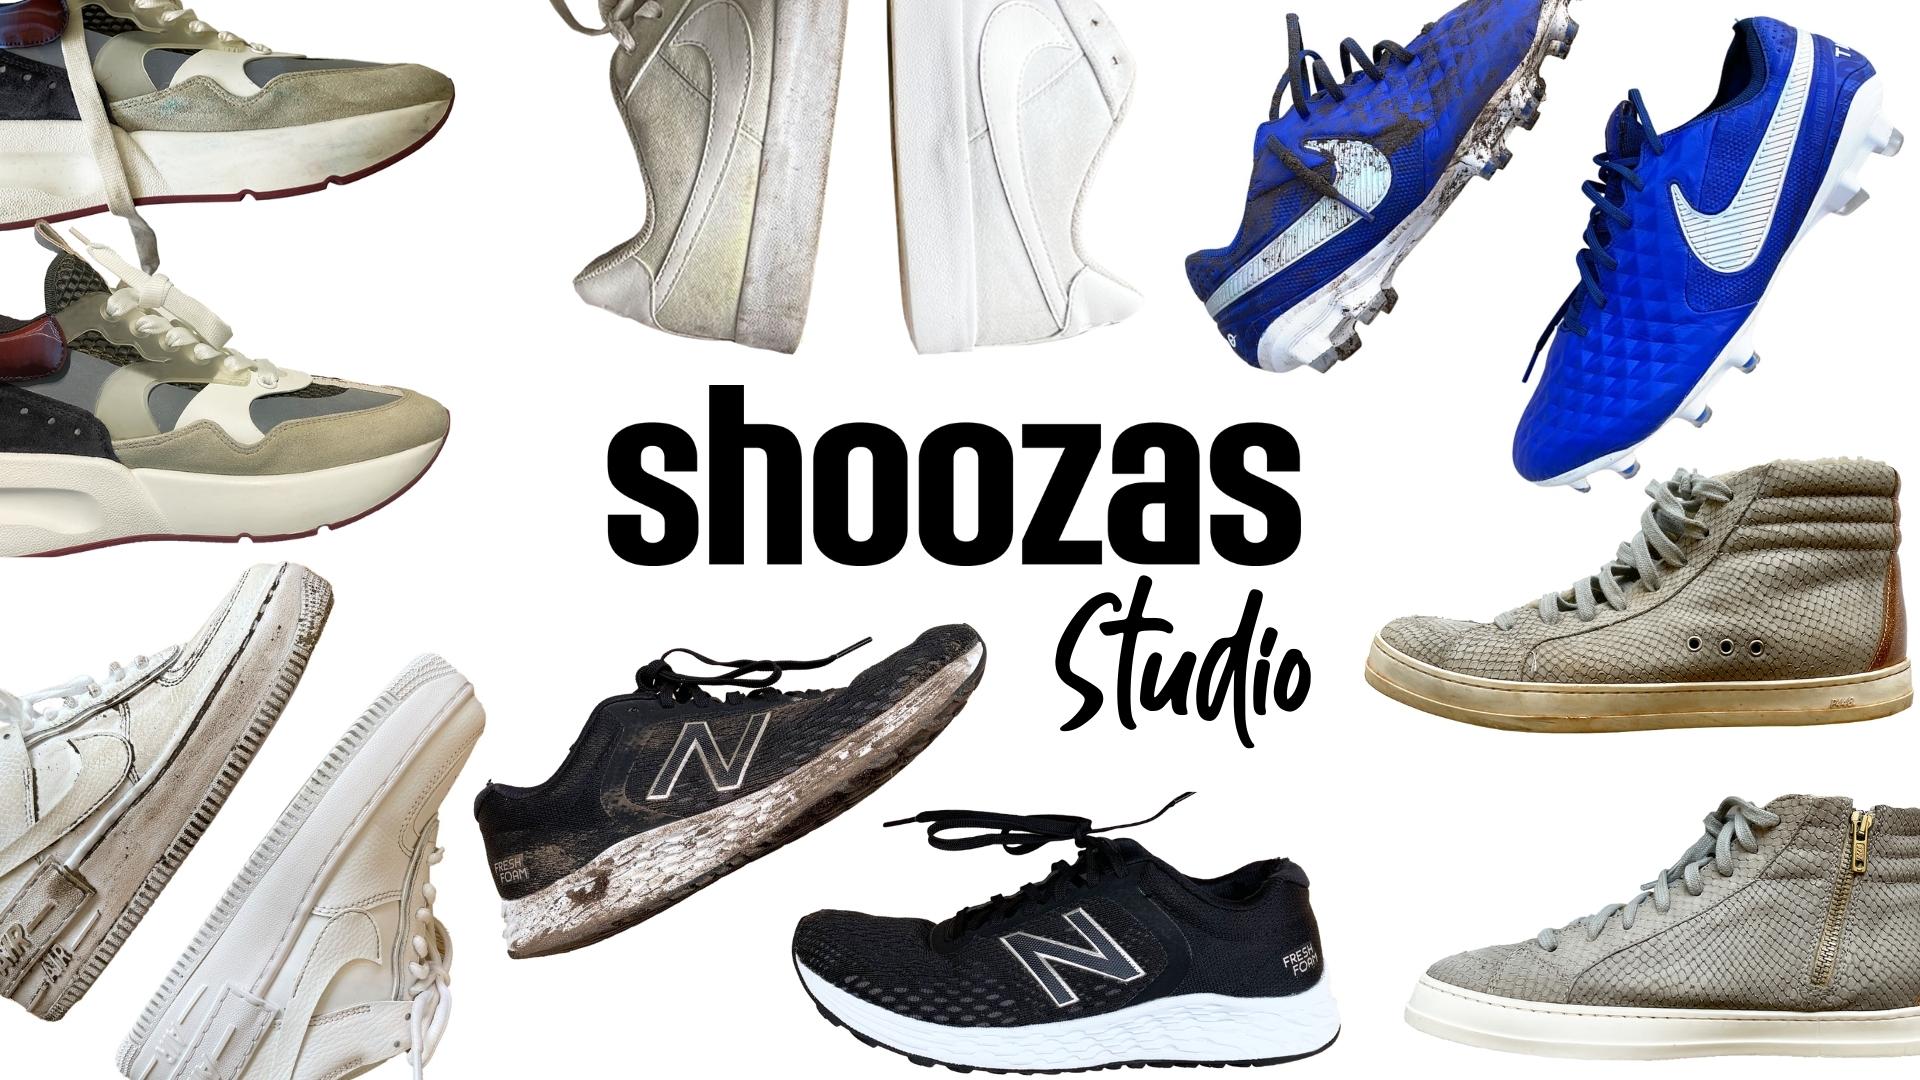 Load video: Shoozas Studio Behind the Scenes - Superior Cleaning Service on Alexander McQueen Mix-Media Trainer